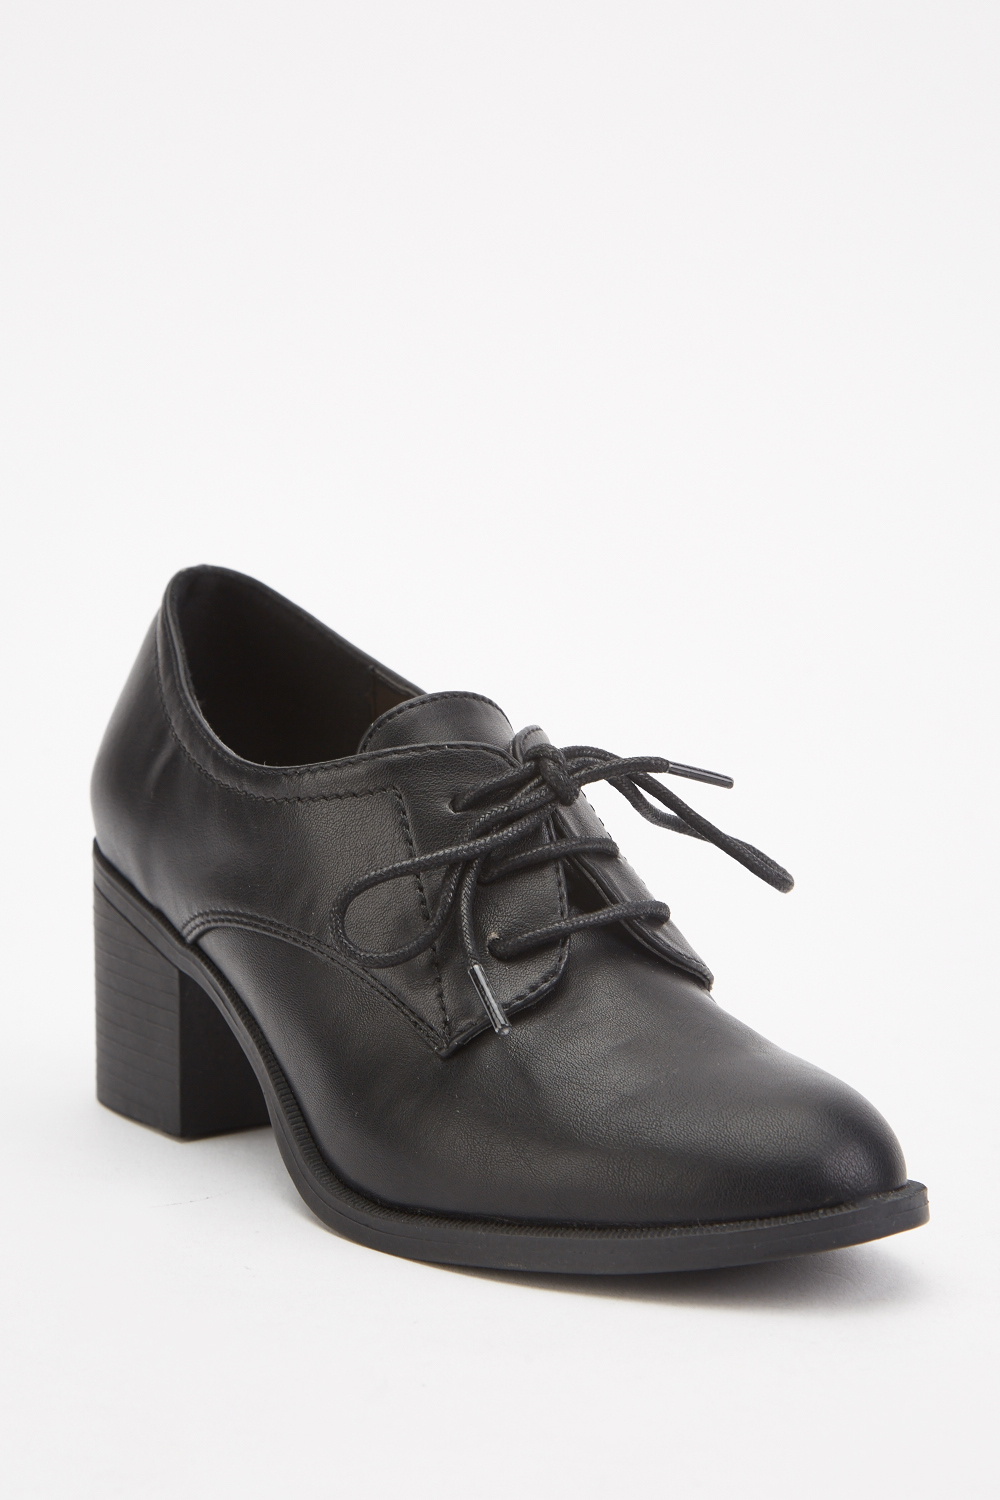 Lace Up Block Heel Shoes - Just $7